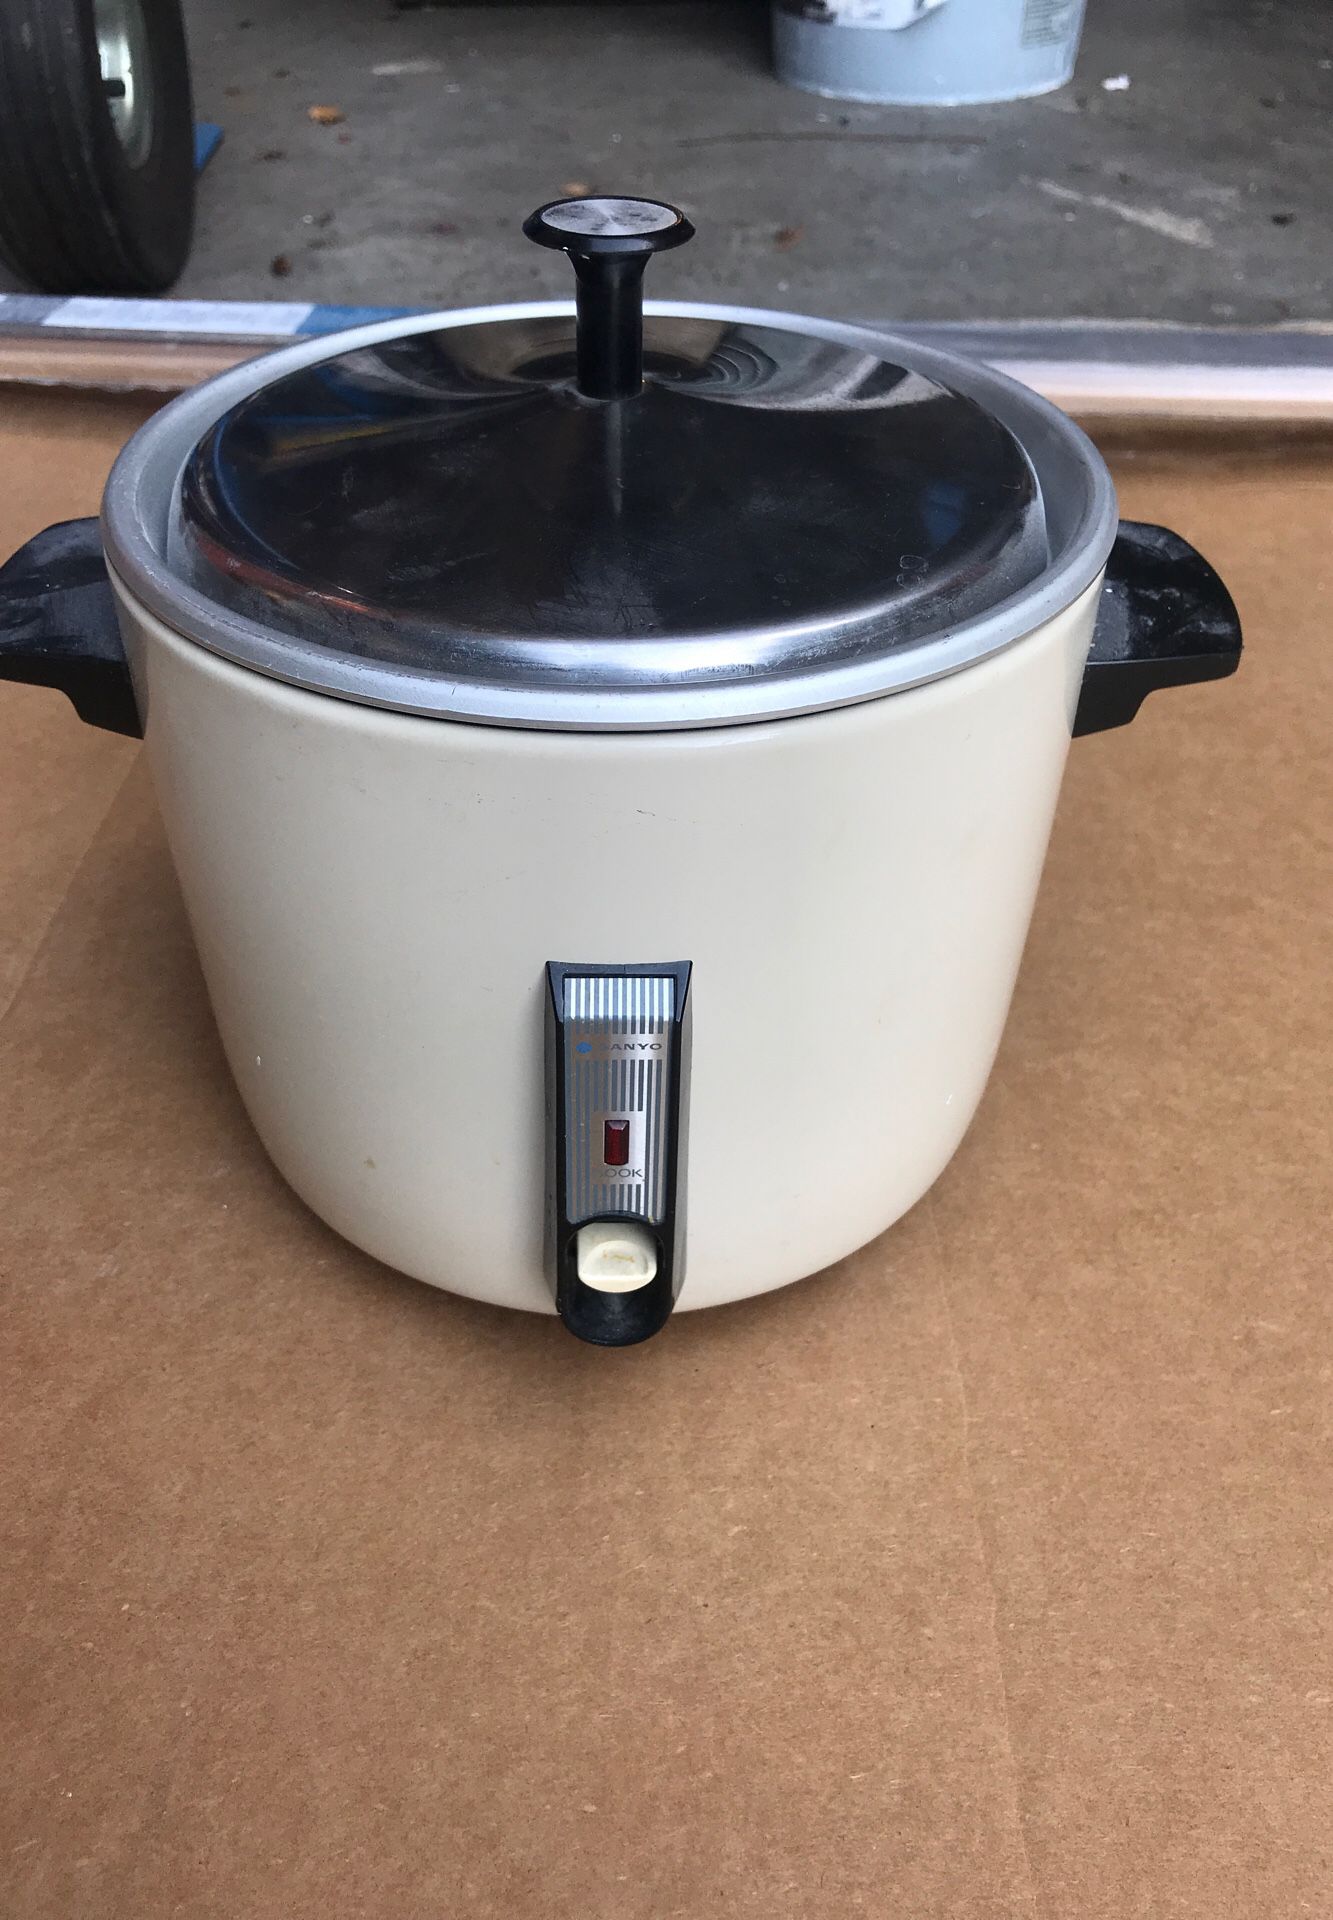 Sanyo 3 Cup Rice Cooker